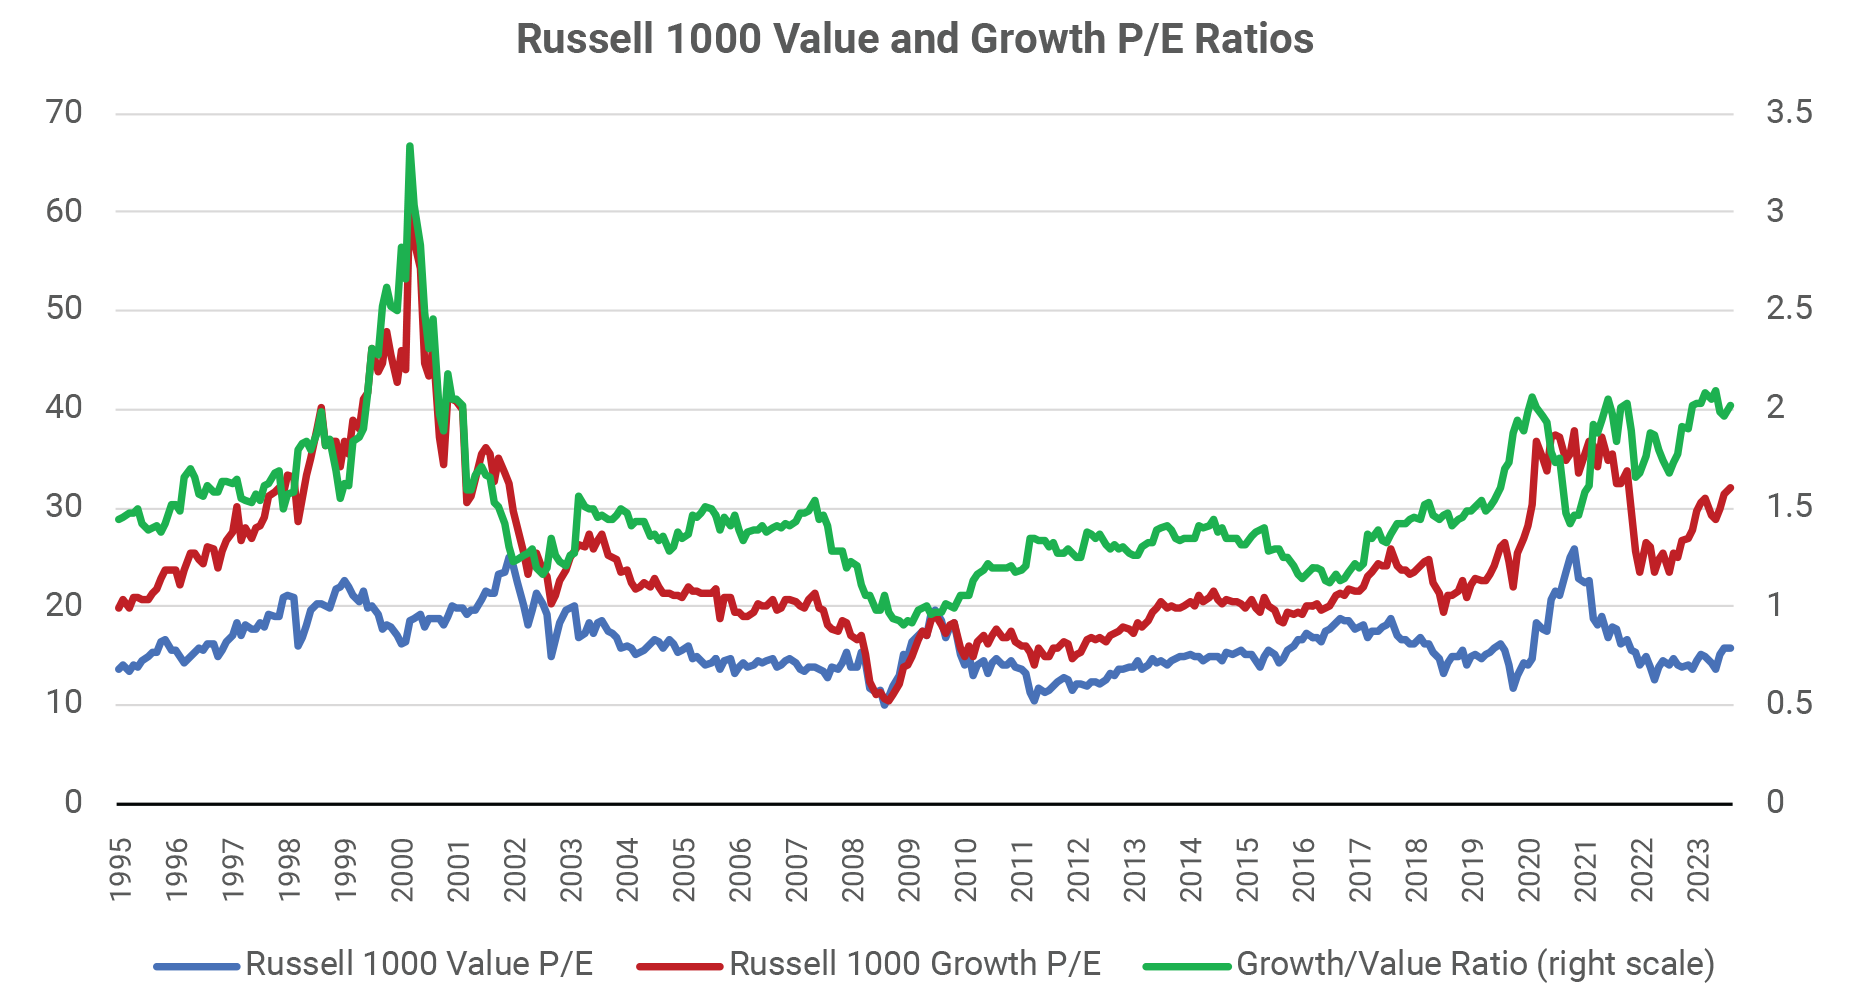 Russell 1000 Value and Growth P/E Ratios